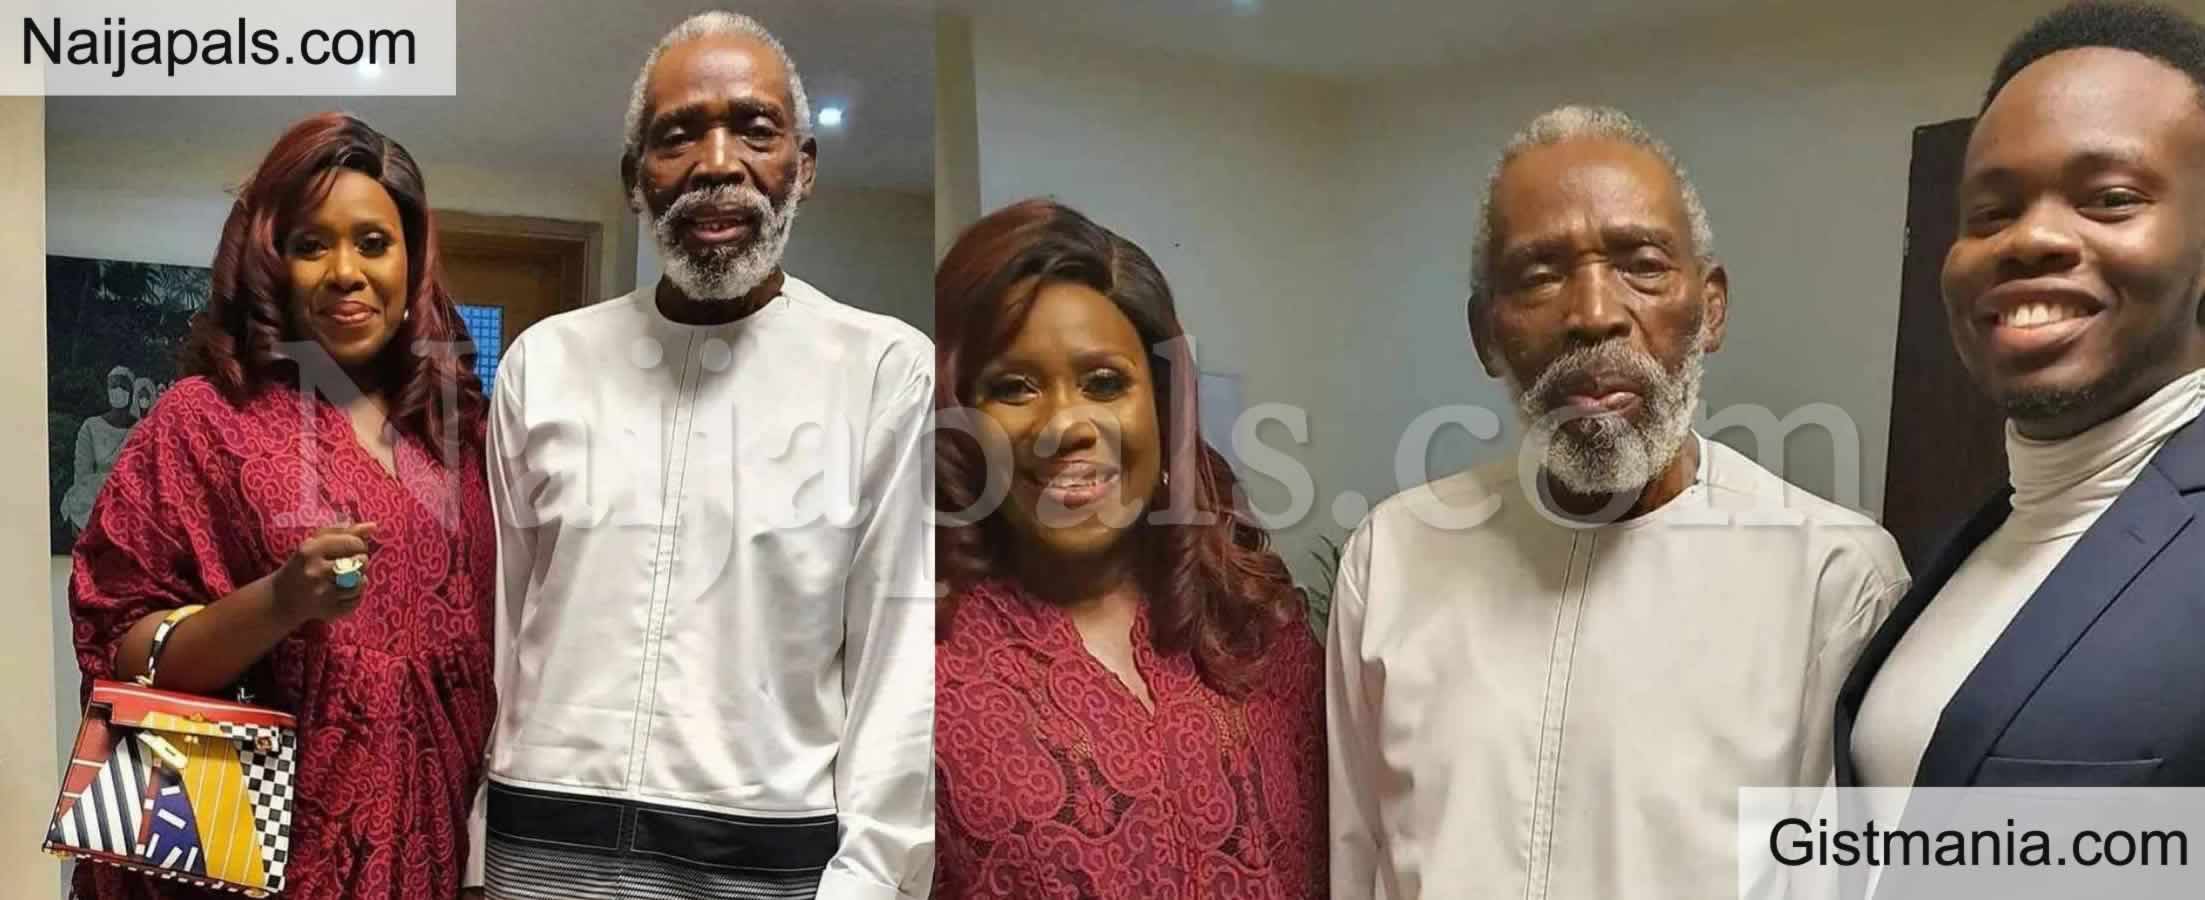 Olu Jacobs And Wife Ajoke Silva Steps Out For the First Time After